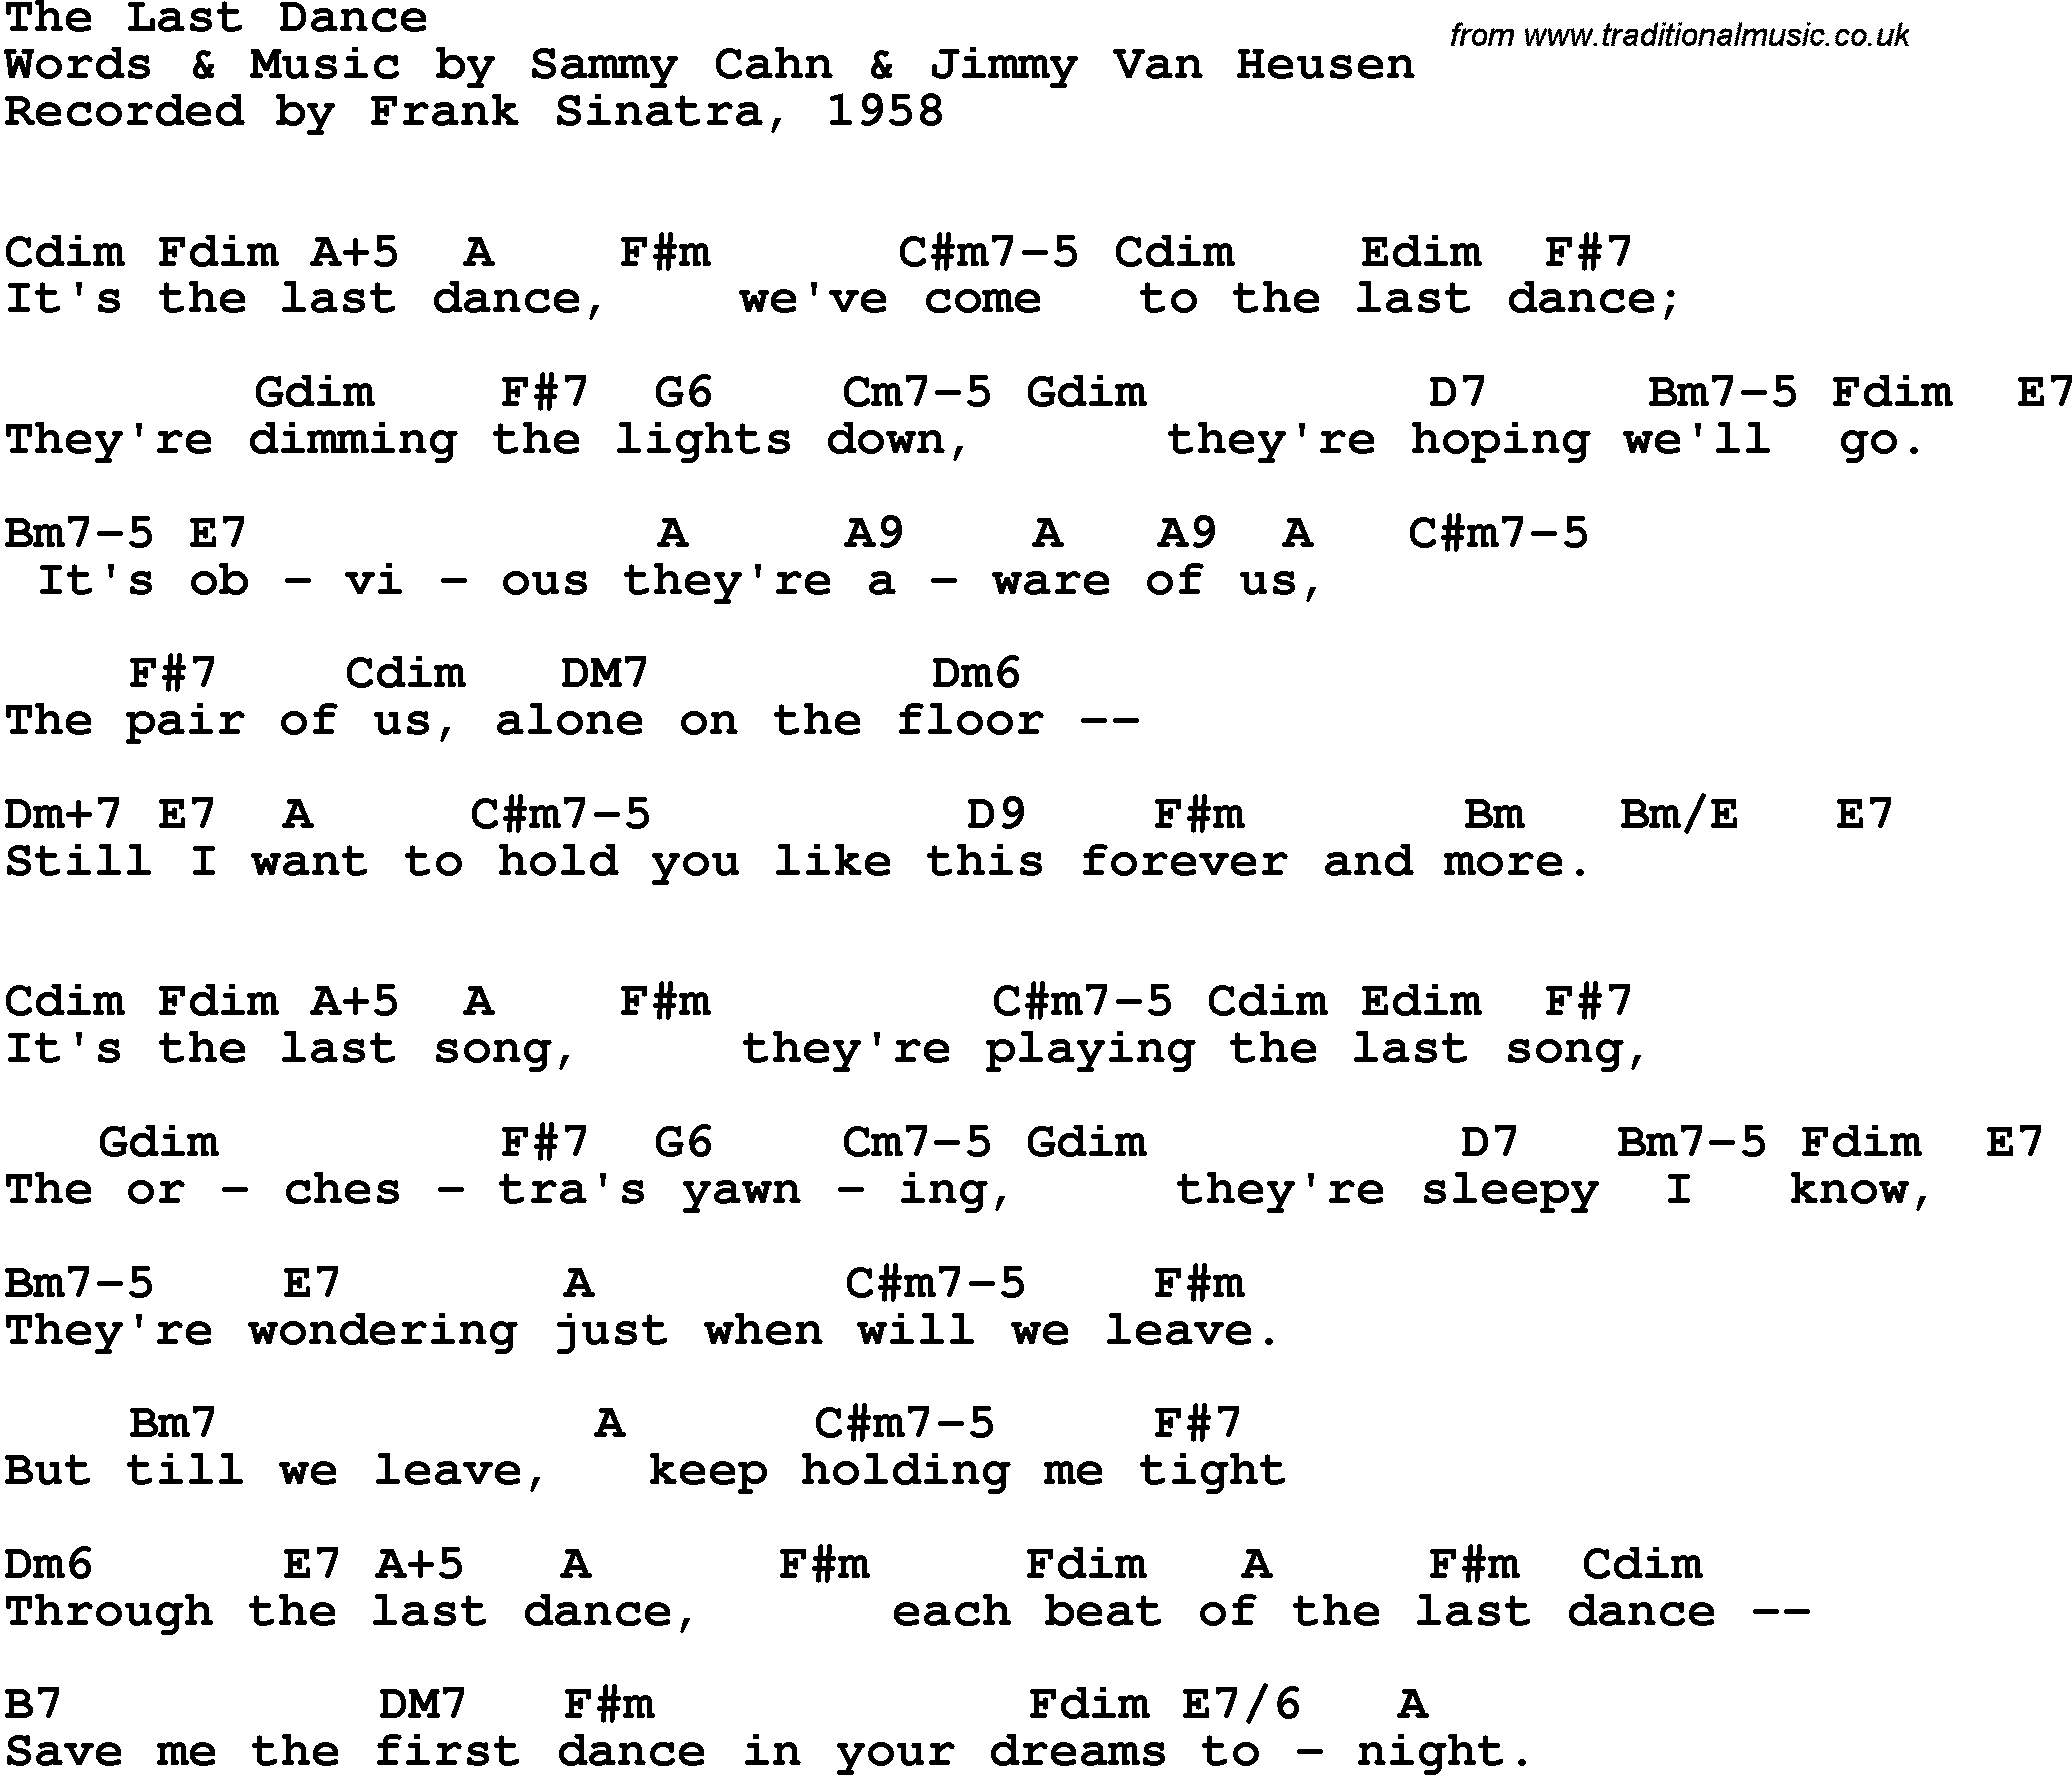 Song Lyrics with guitar chords for Last Dance, The - Frank Sinatra, 1958